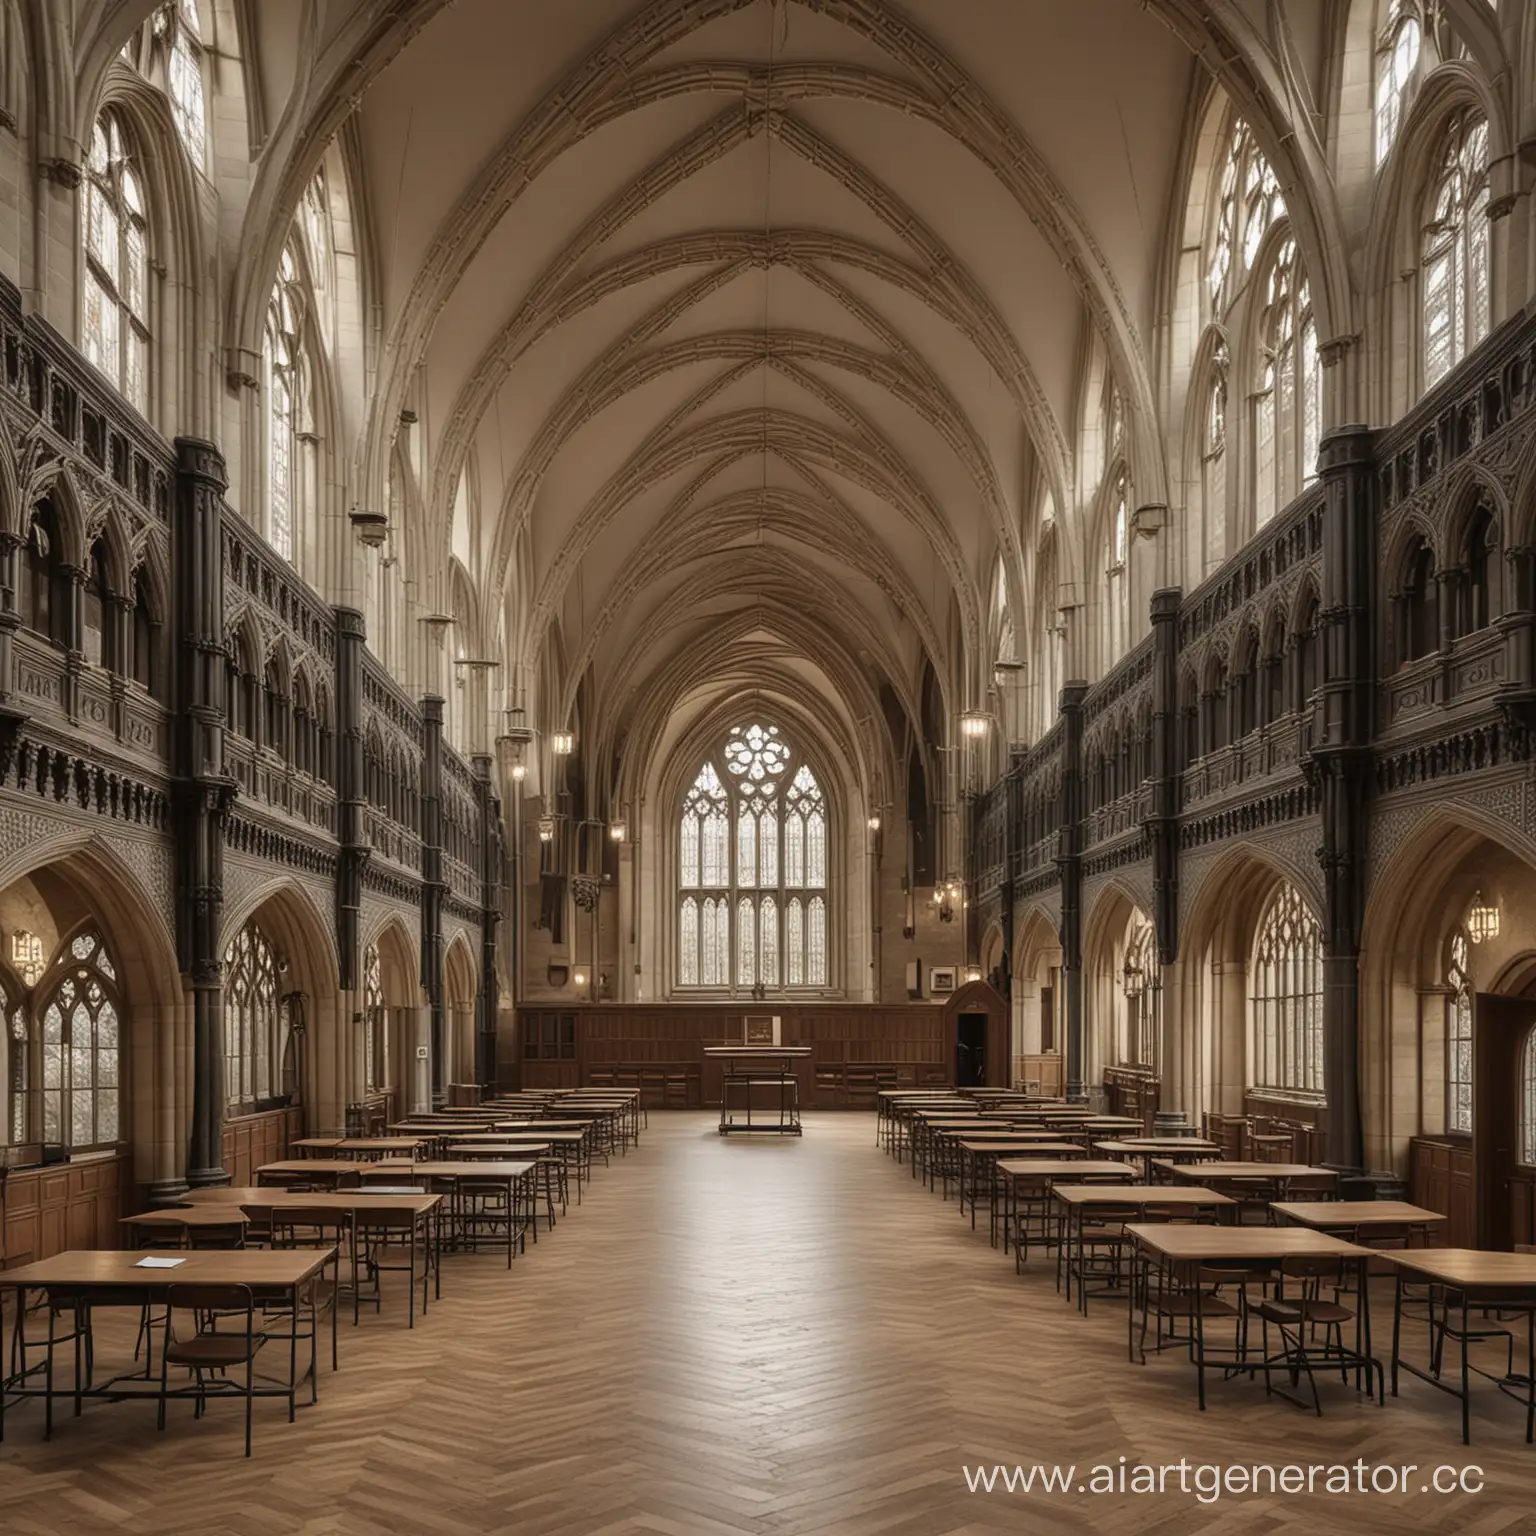 NeoGothic-Style-School-Building-with-Elegant-Architecture